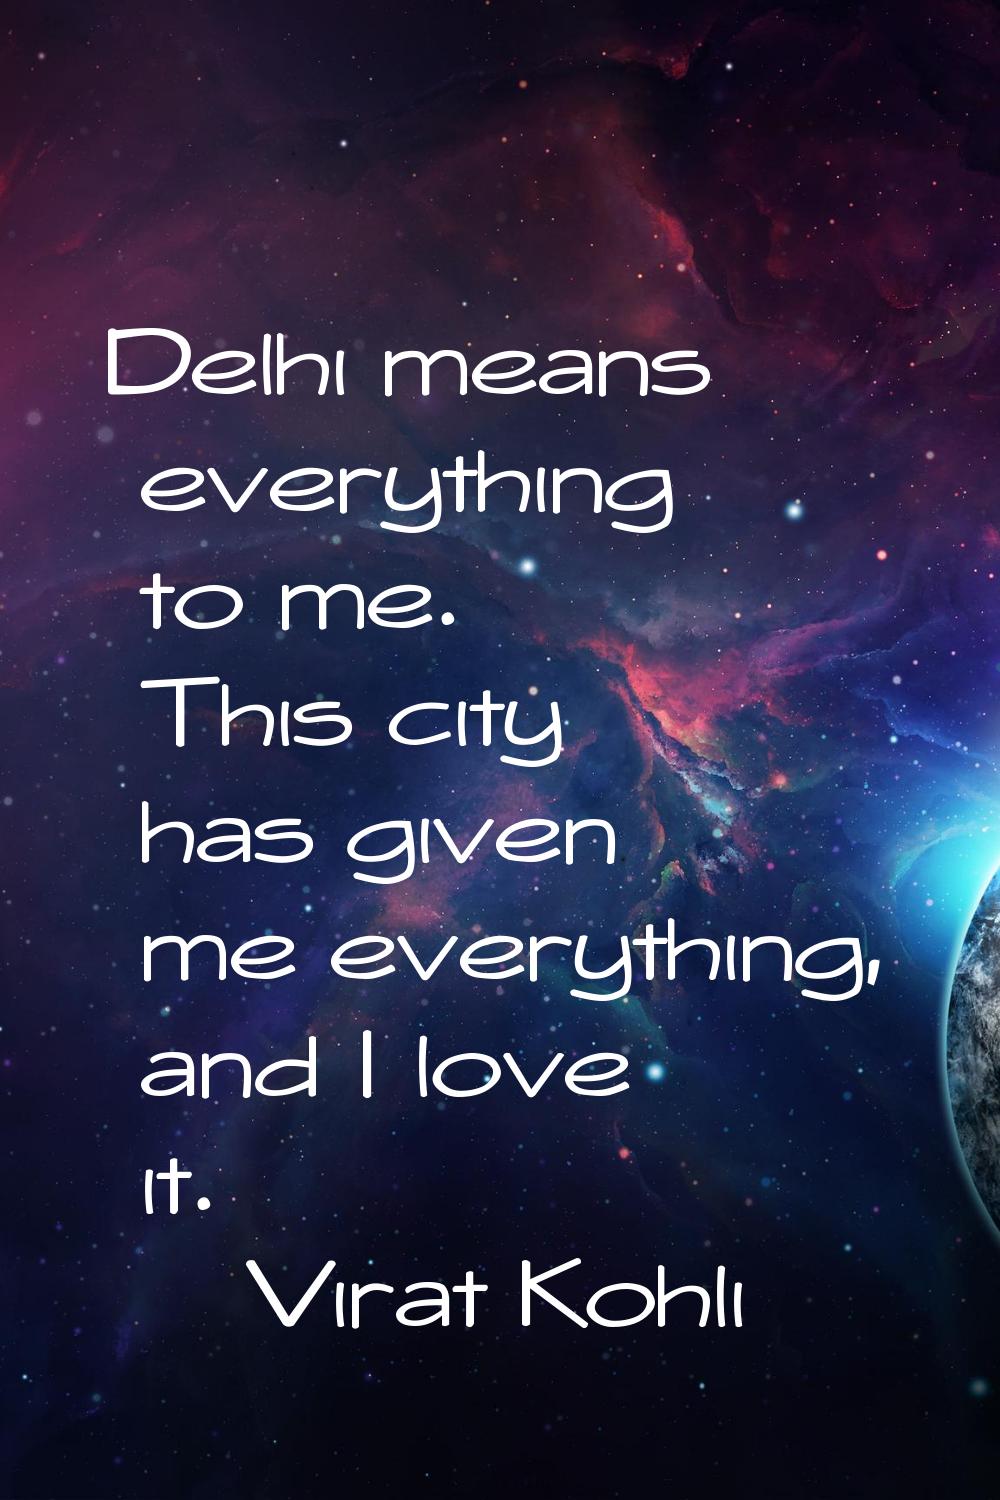 Delhi means everything to me. This city has given me everything, and I love it.